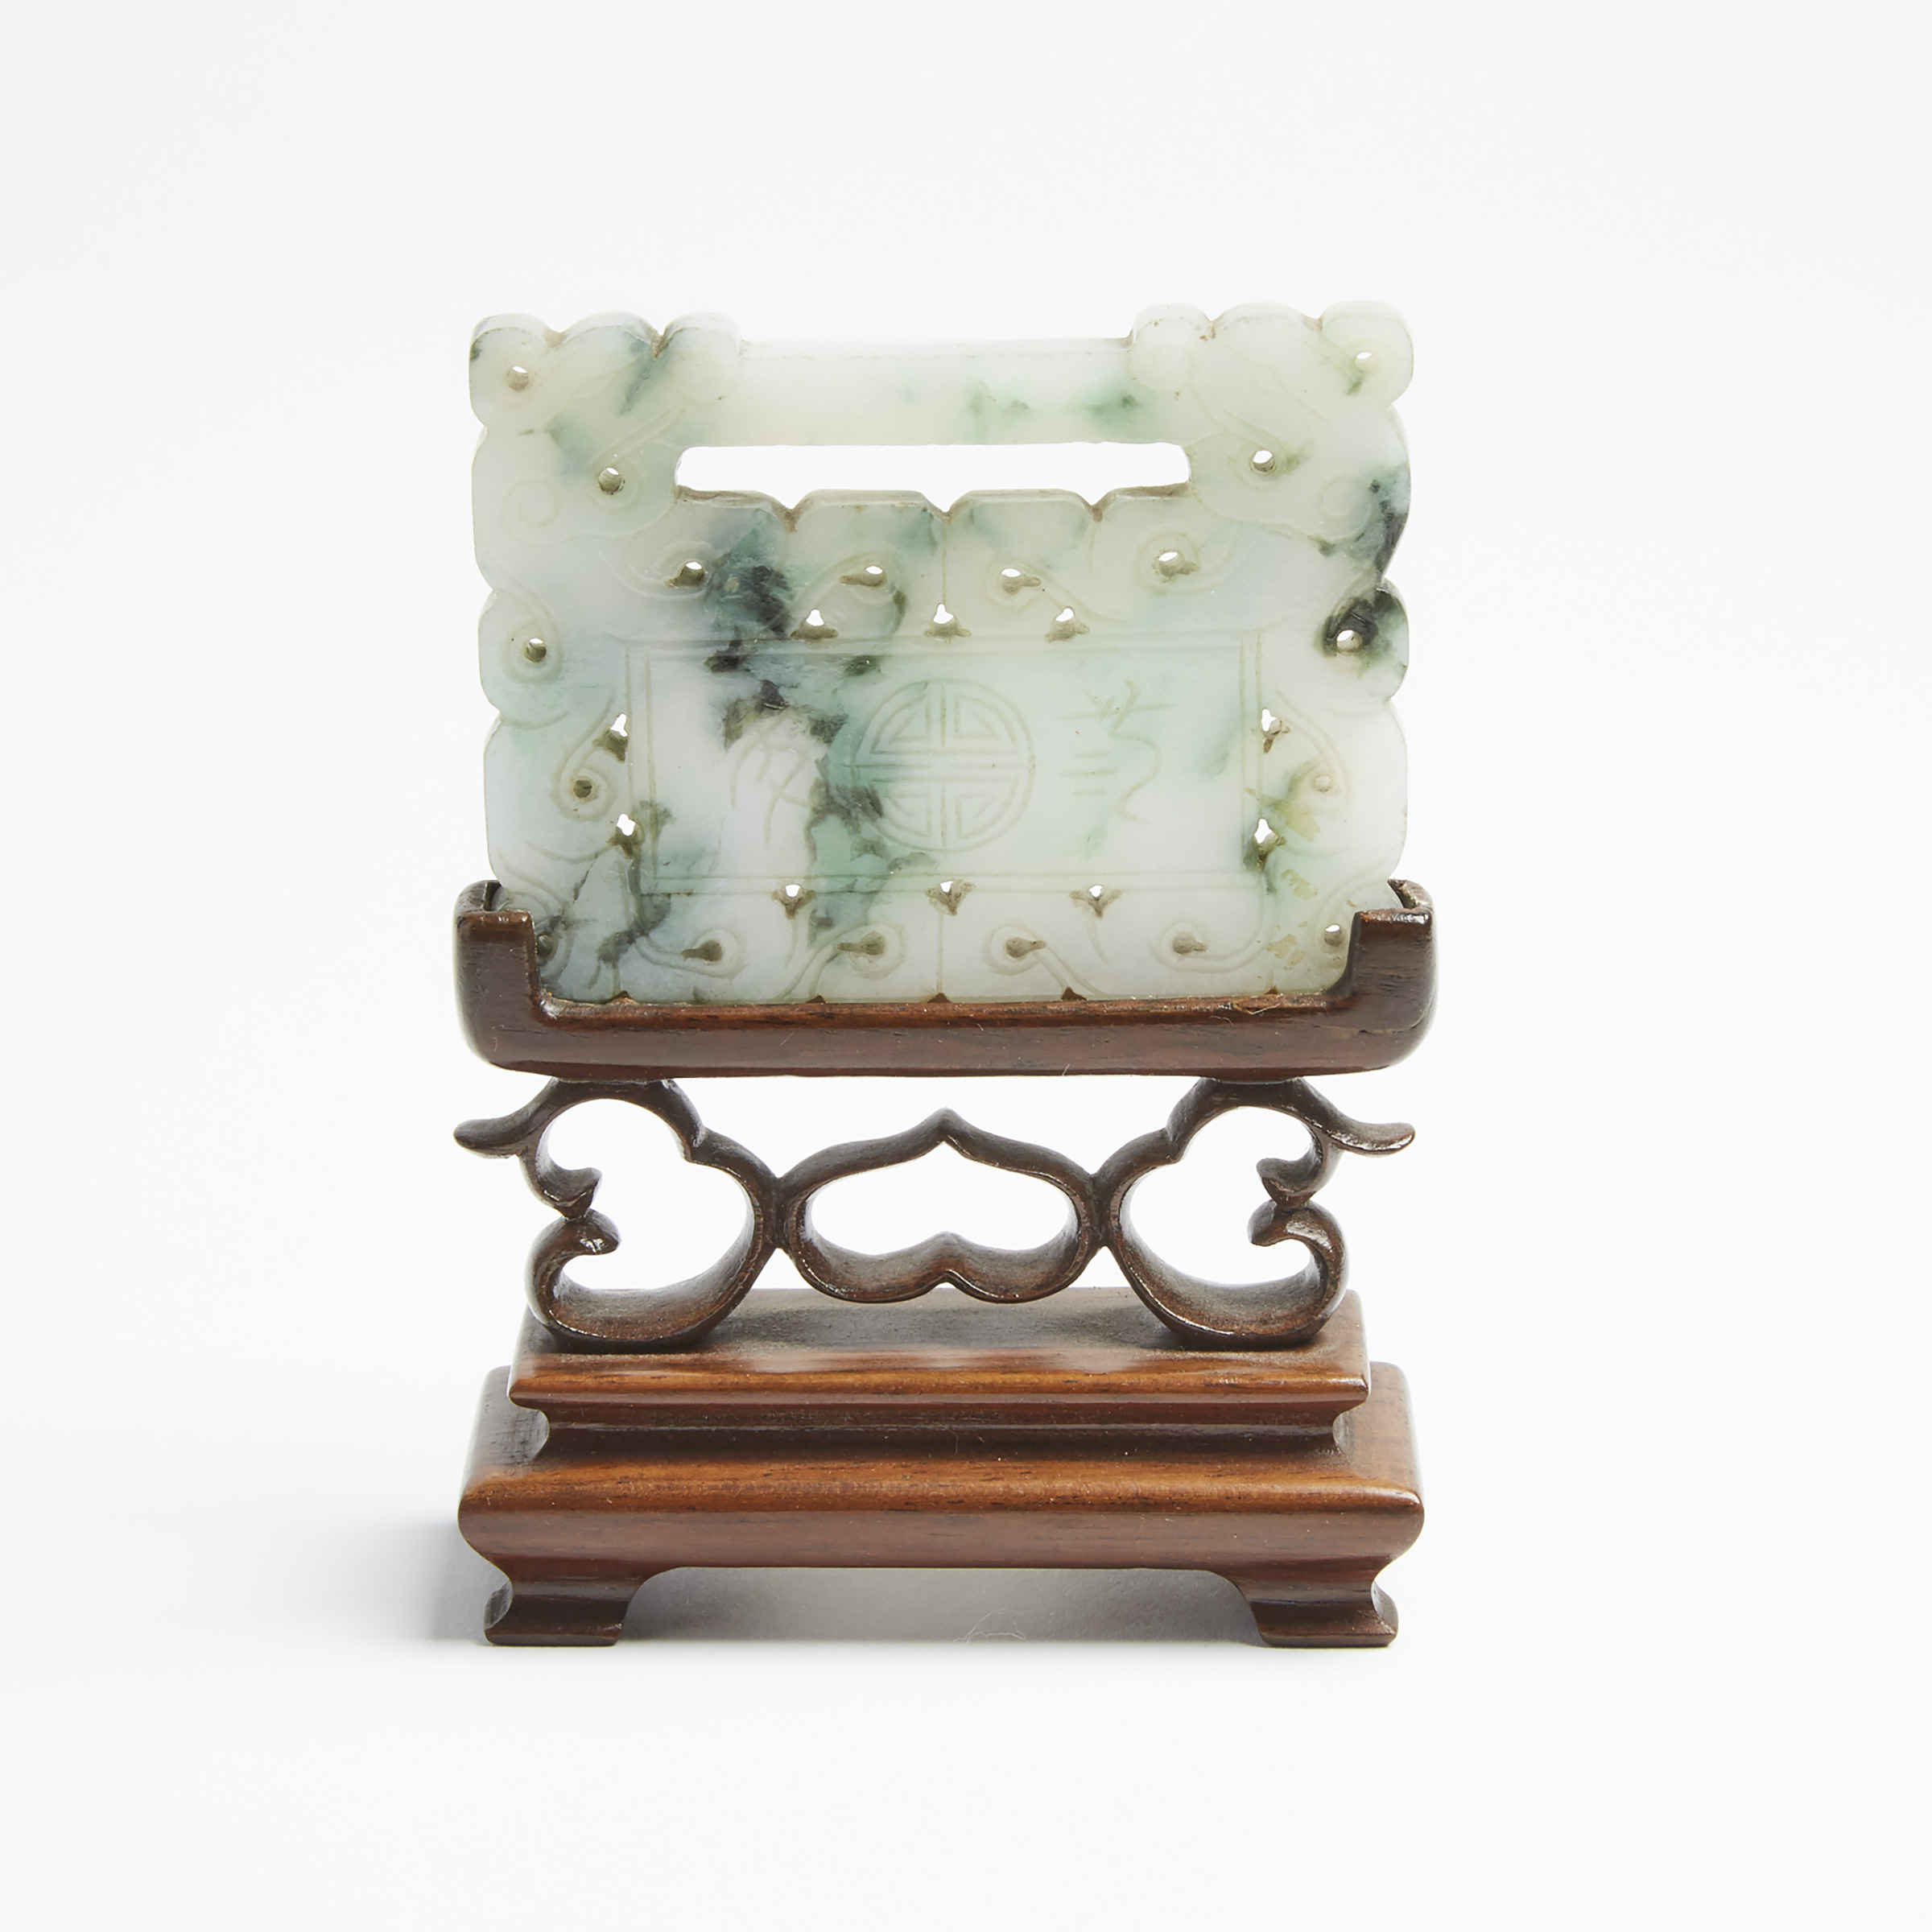 A Jadeite Rectangular Lock-Form Plaque with Stand, Late Qing Dynasty